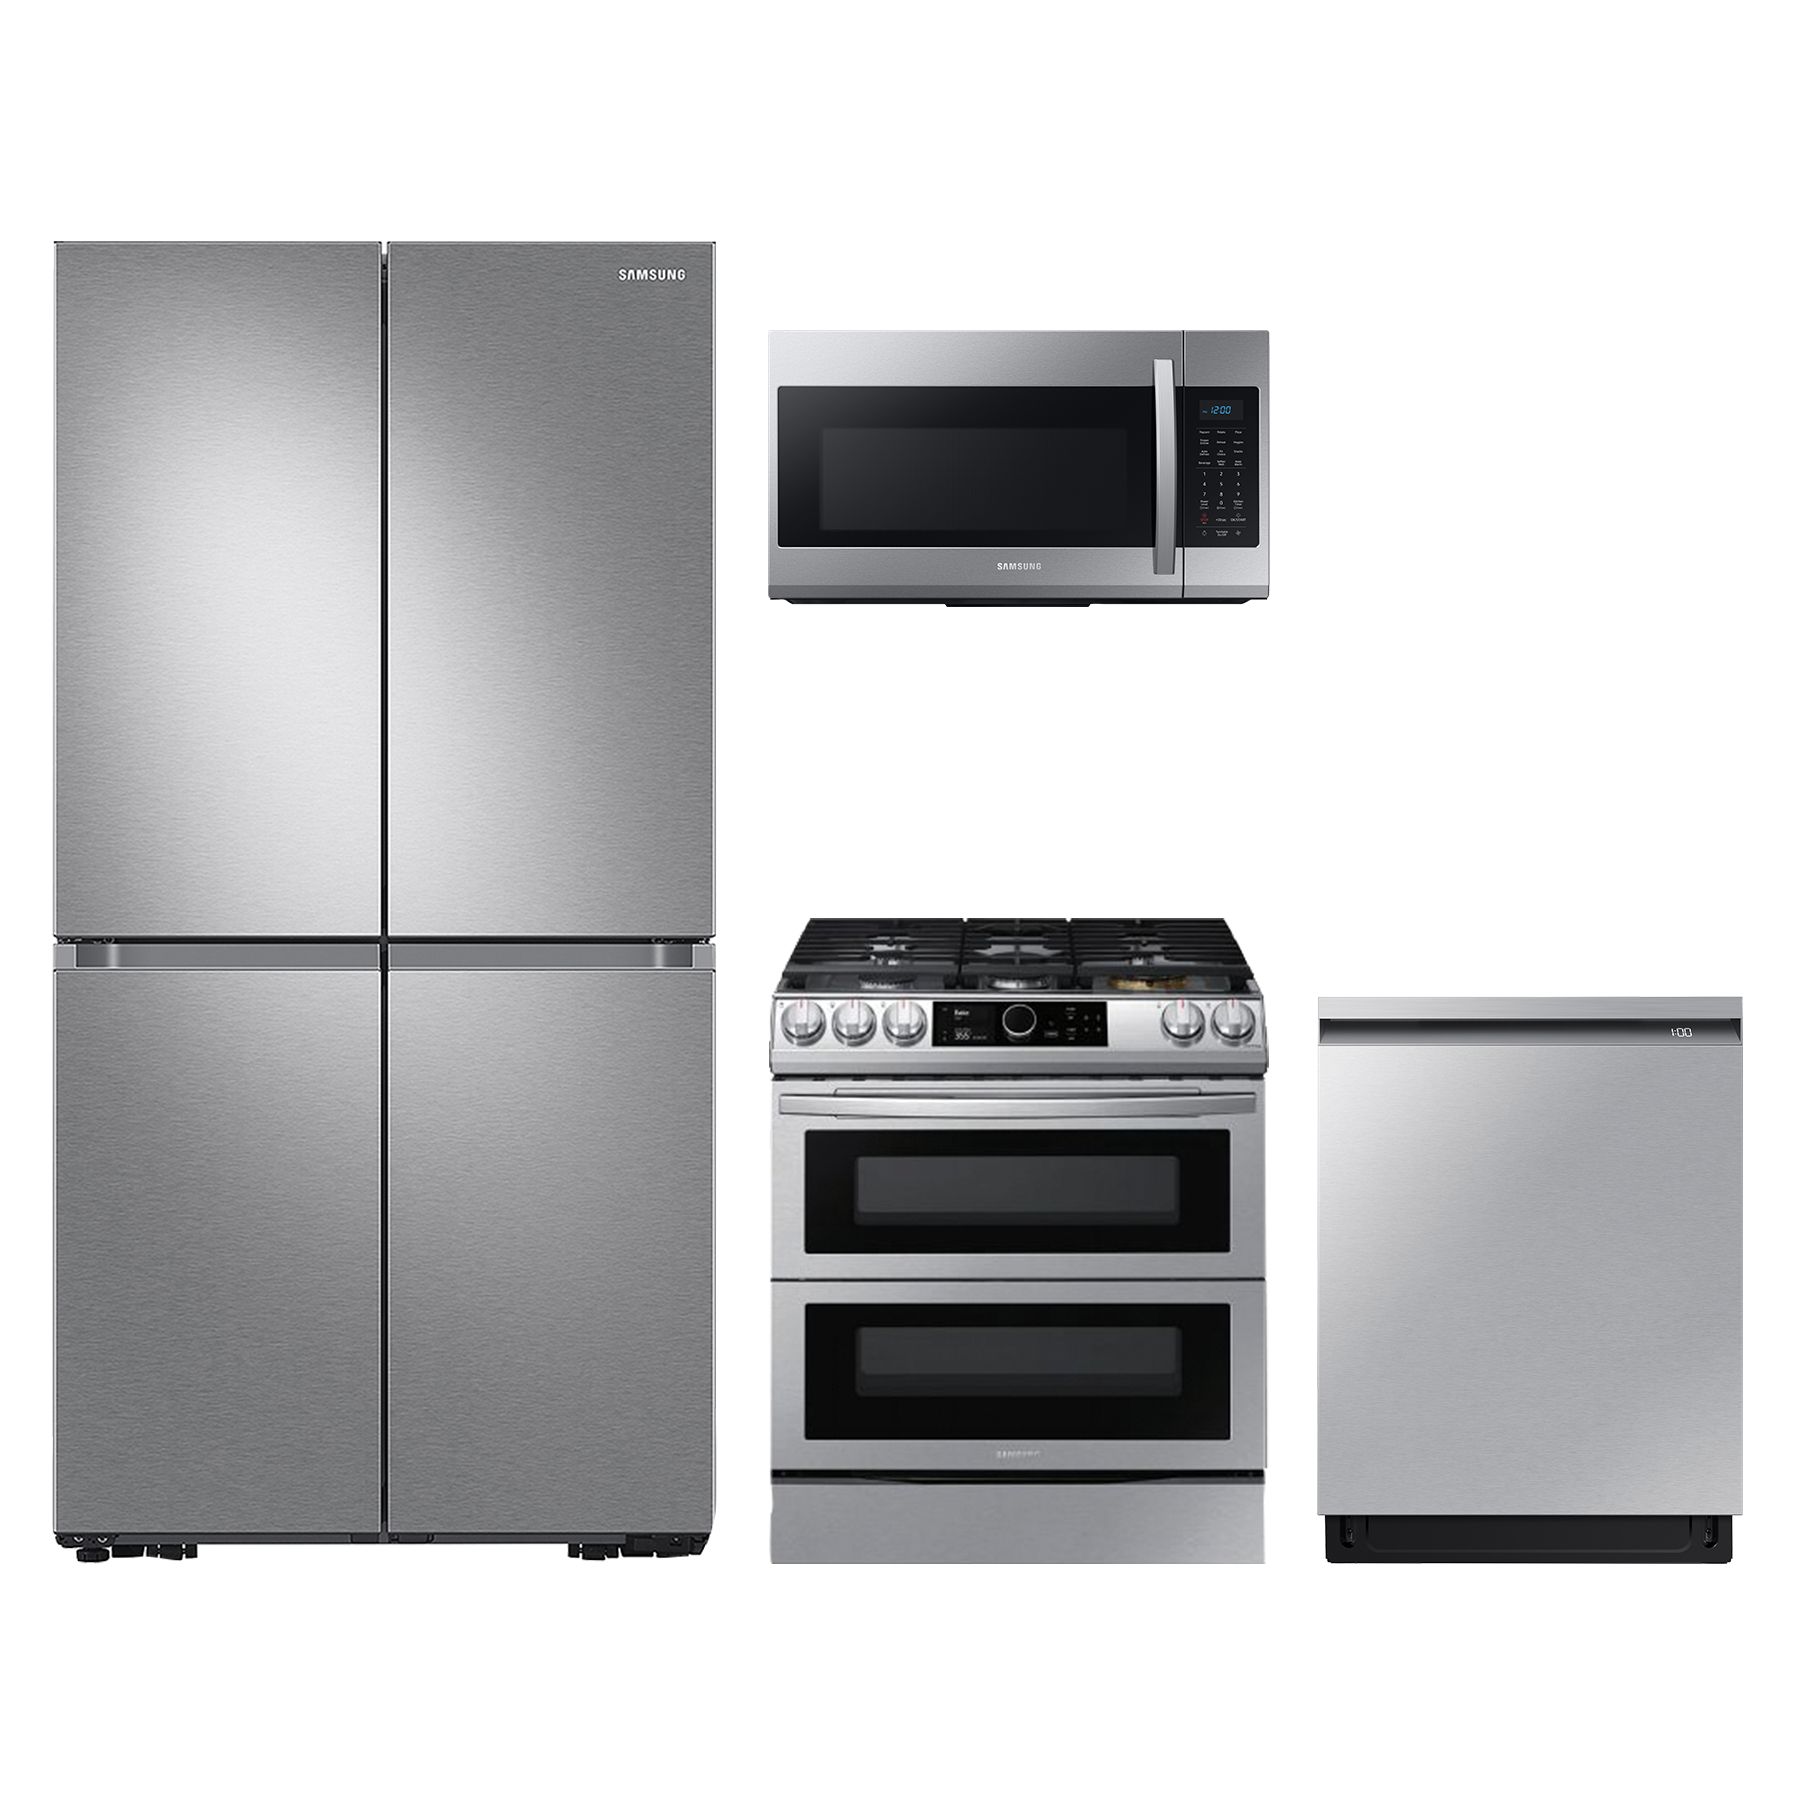 4 best samsung kitchen appliance packages + features| don's